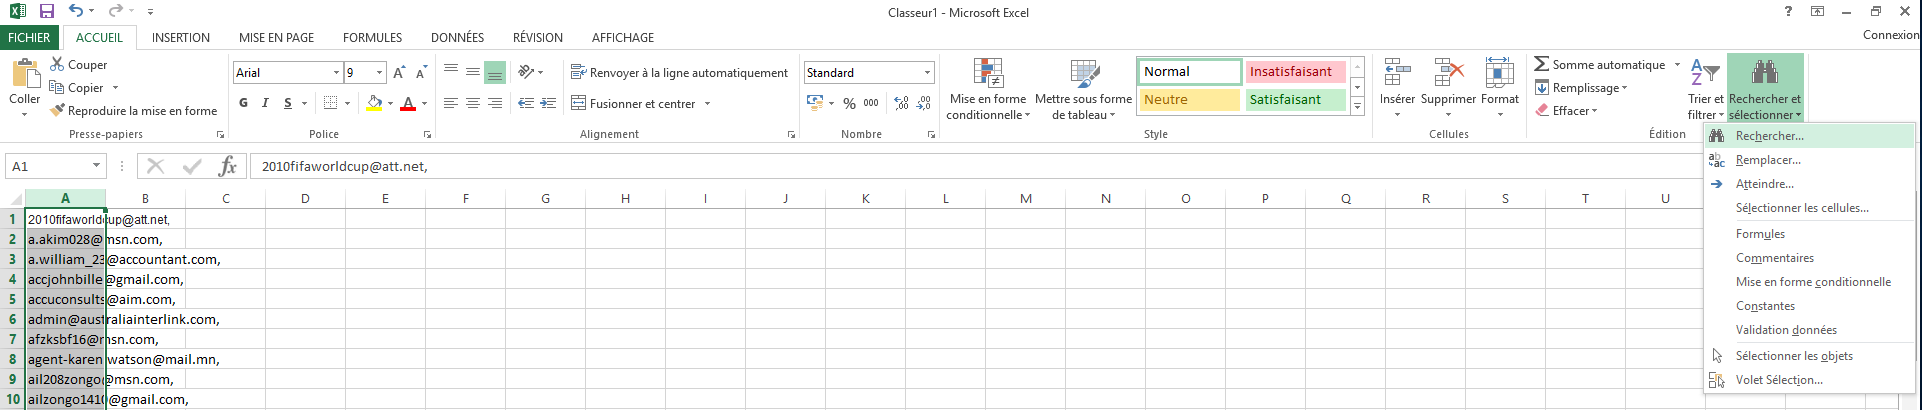 excel28